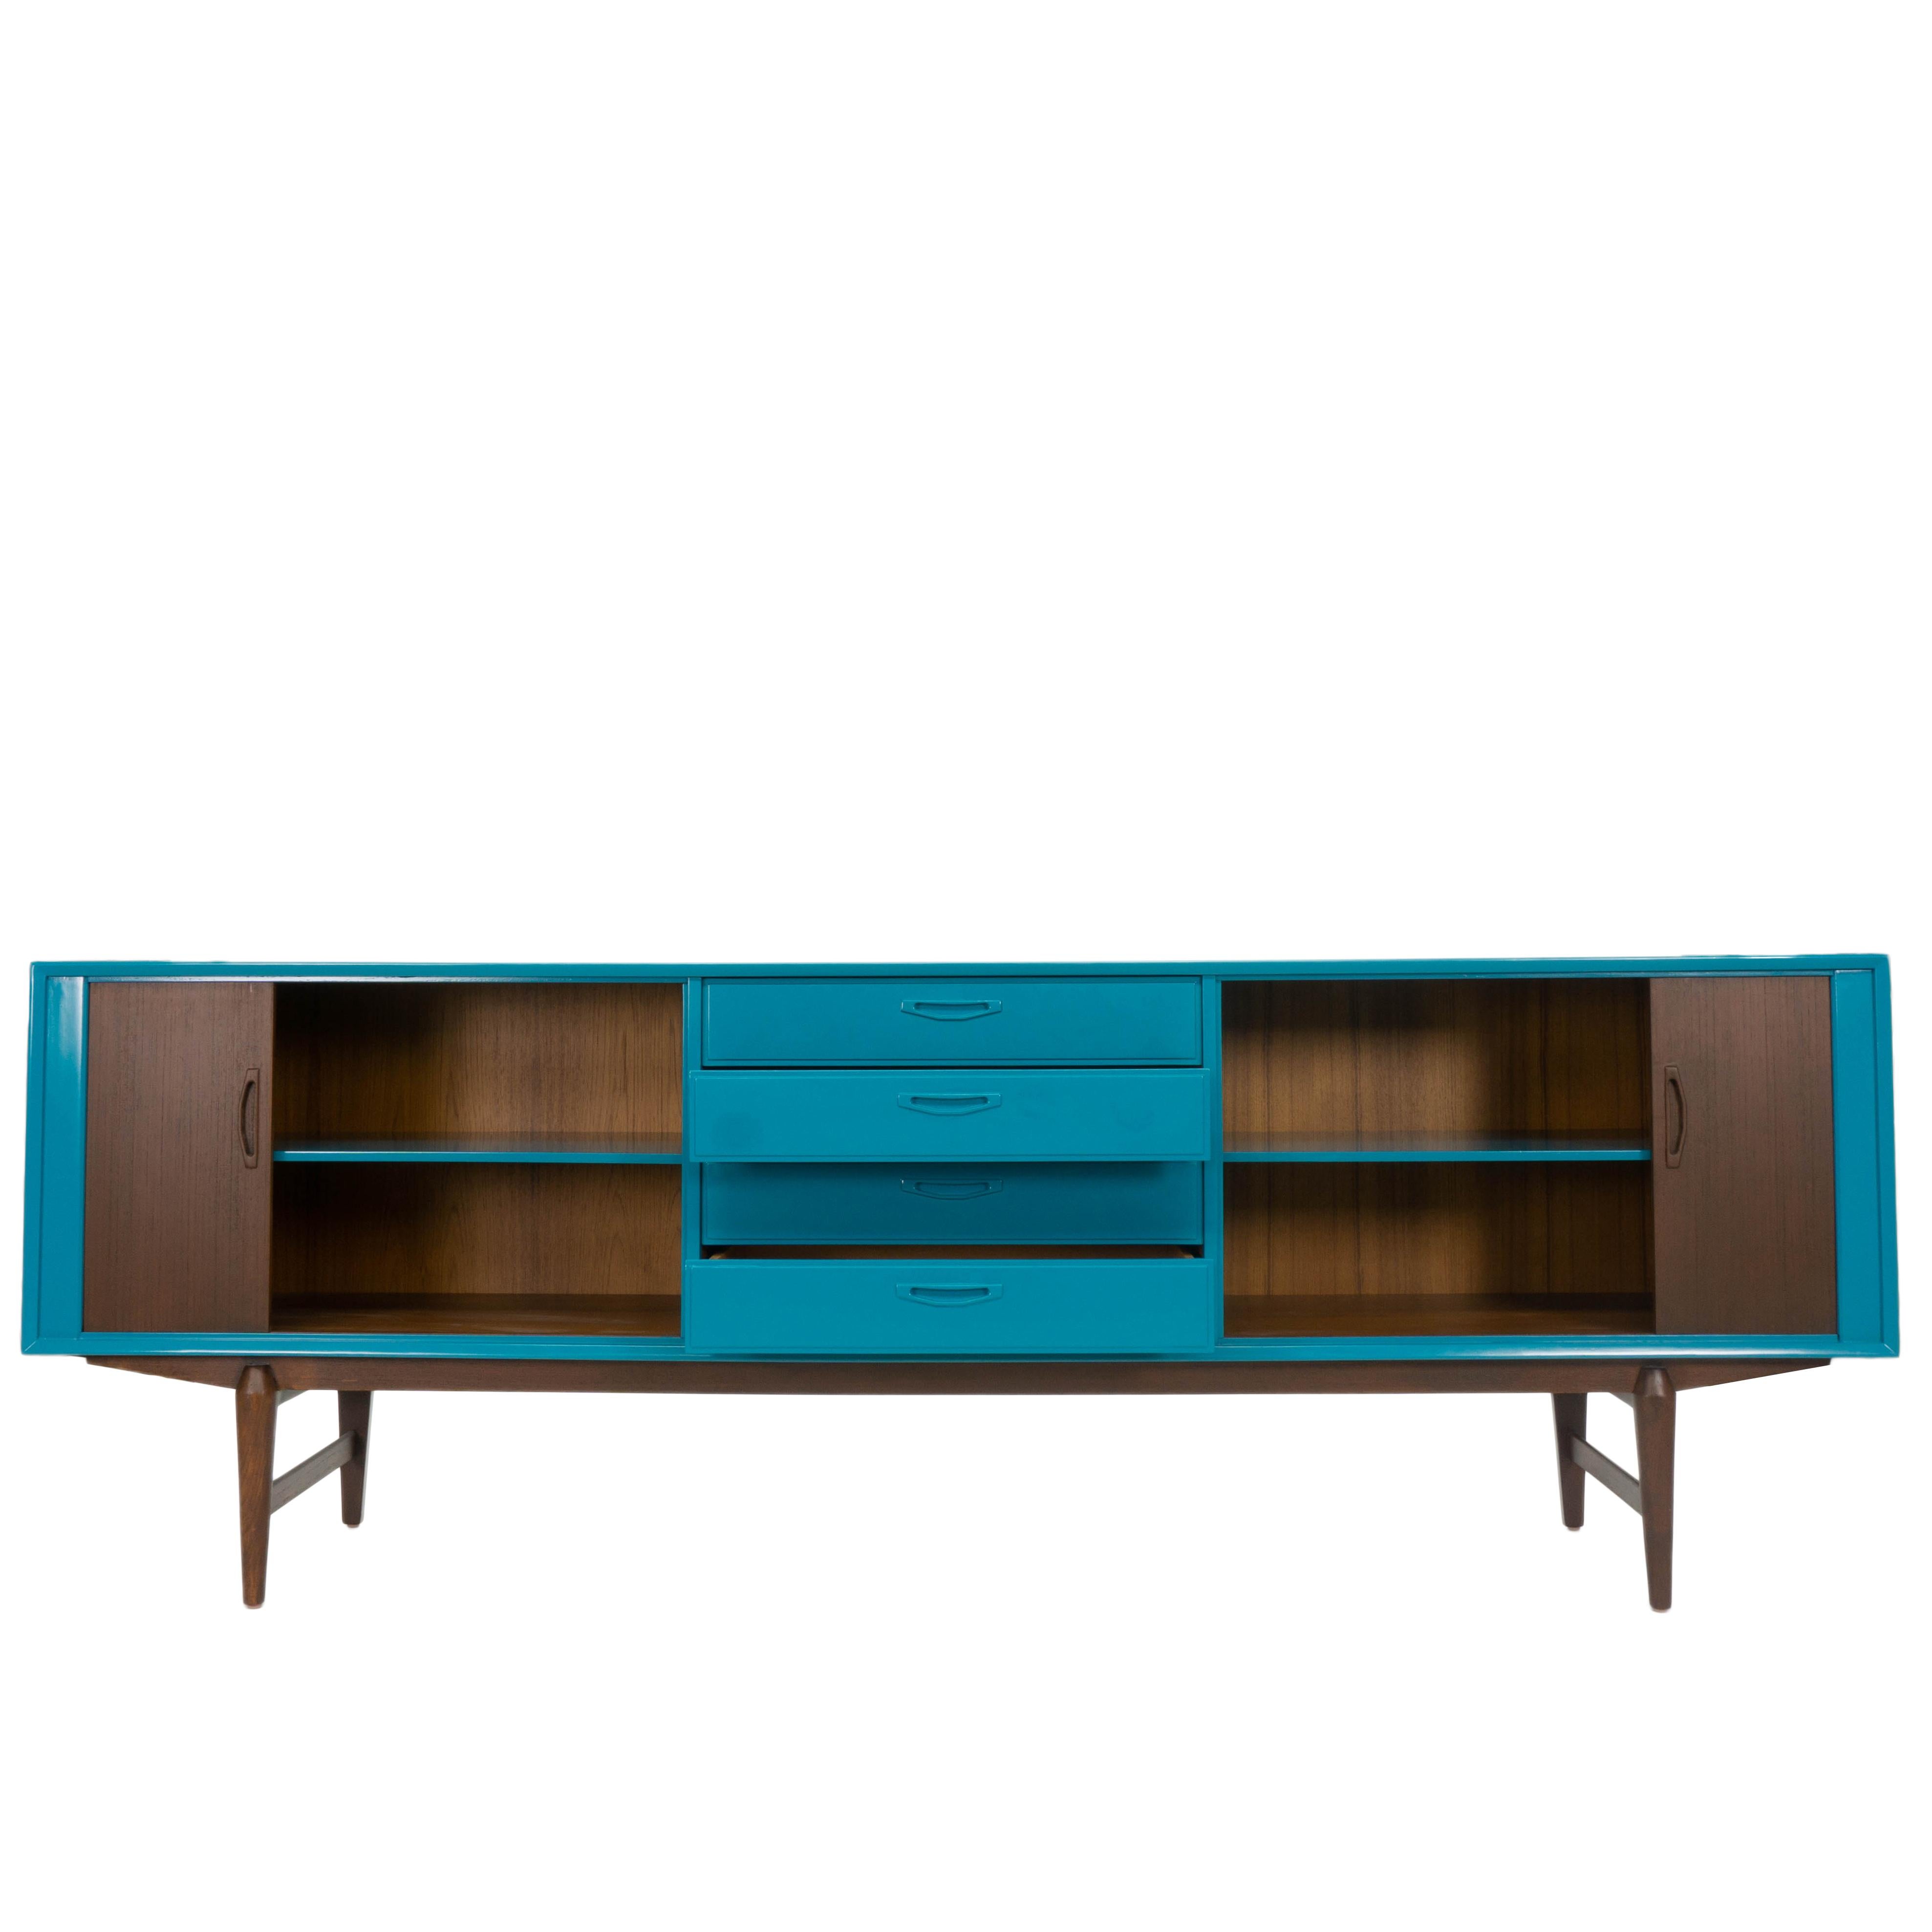 This vintage Mid-Century Modern sideboard has been refinished and lacquered in a bright turquoise blue. The wooden doors and tapered legs have a dark walnut stain with some red undertones. The sideboard also features two tambour doors and four